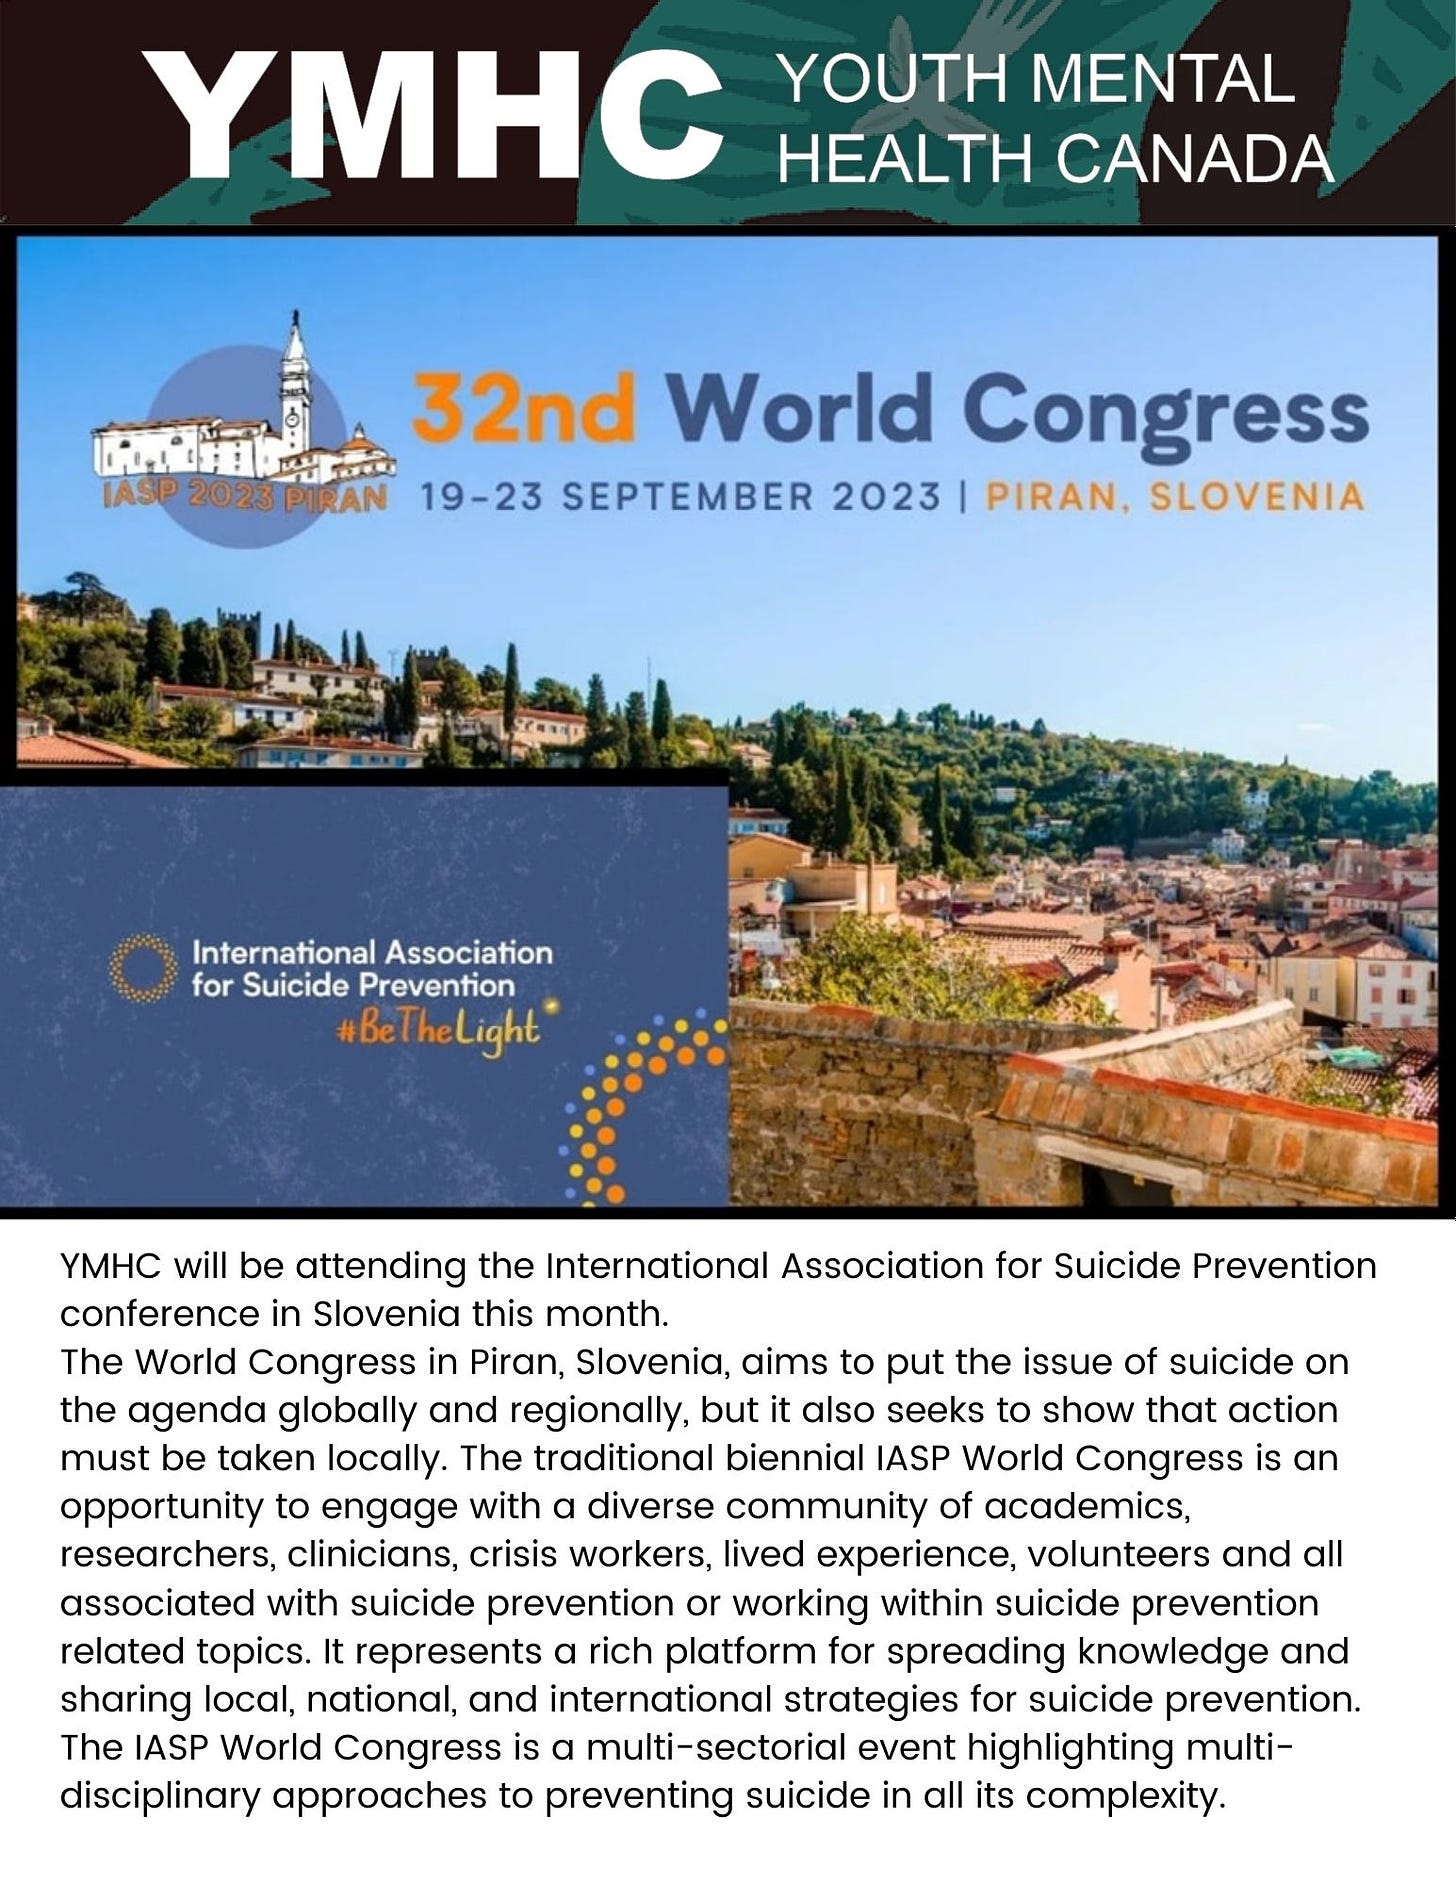 YMHC will be attending the International Association for Suicide Prevention conference in Slovenia this month. The World Congress in Piran, Slovenia, aims to put the issue of suicide on the agenda globally and regionally, but it also seeks to show that action must be taken locally. The traditional biennial IASP World Congress is an opportunity to engage with a diverse community of academics, researchers, clinicians, crisis workers, lived experience, volunteers and all associated with suicide prevention or working within suicide prevention related topics. It represents a rich platform for spreading knowledge and sharing local, national, and international strategies for suicide prevention. The IASP World Congress is a multi-sectorial event highlighting multi-disciplinary approaches to preventing suicide in all its complexity.